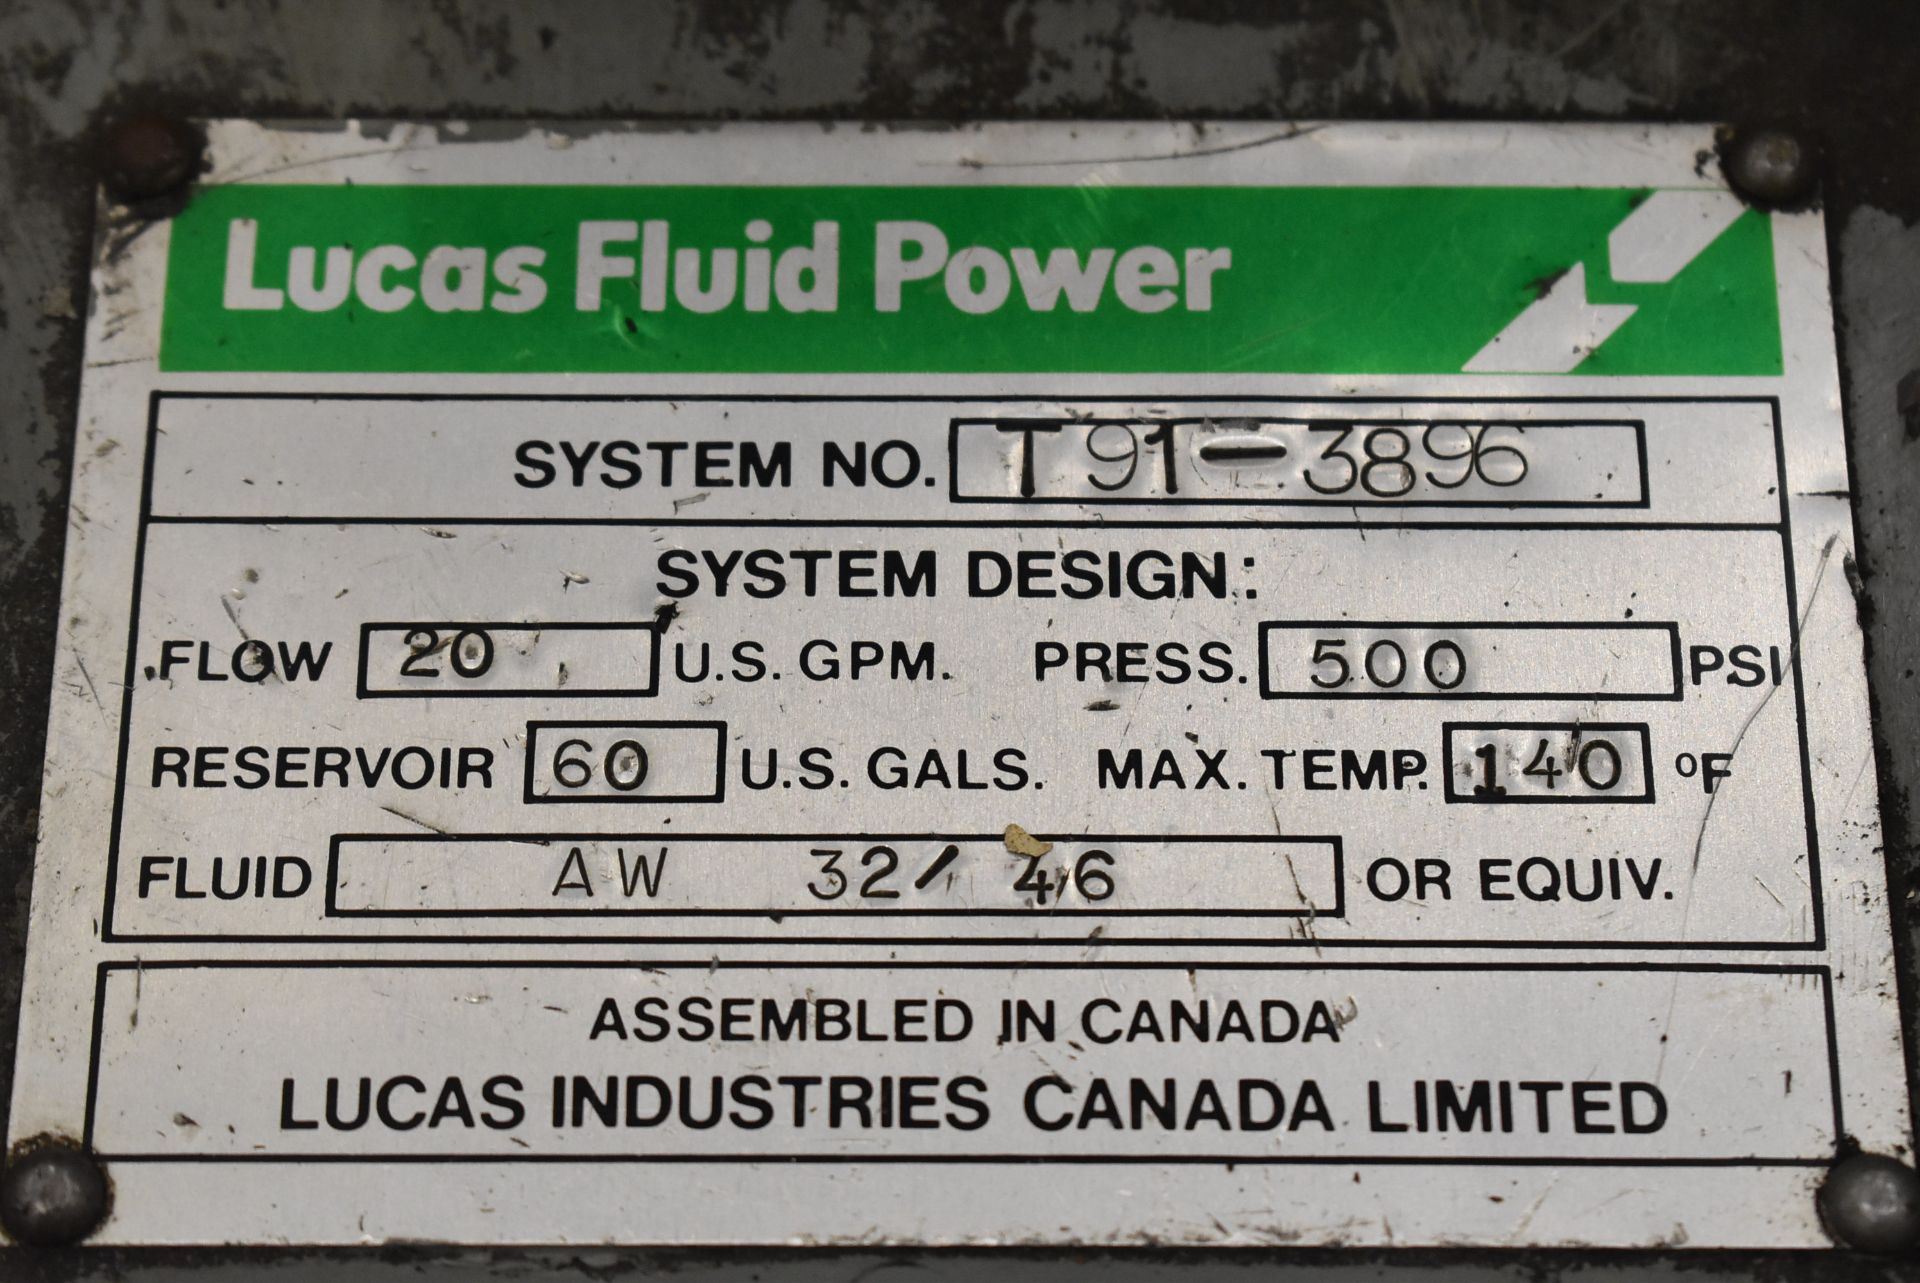 LUCAS FLUID POWER 7.5 HP HYDRAULIC POWER PACK SYSTEM WITH 60 GAL. FLUID RESERVOIR, S/N: T91-3896 ( - Image 3 of 3